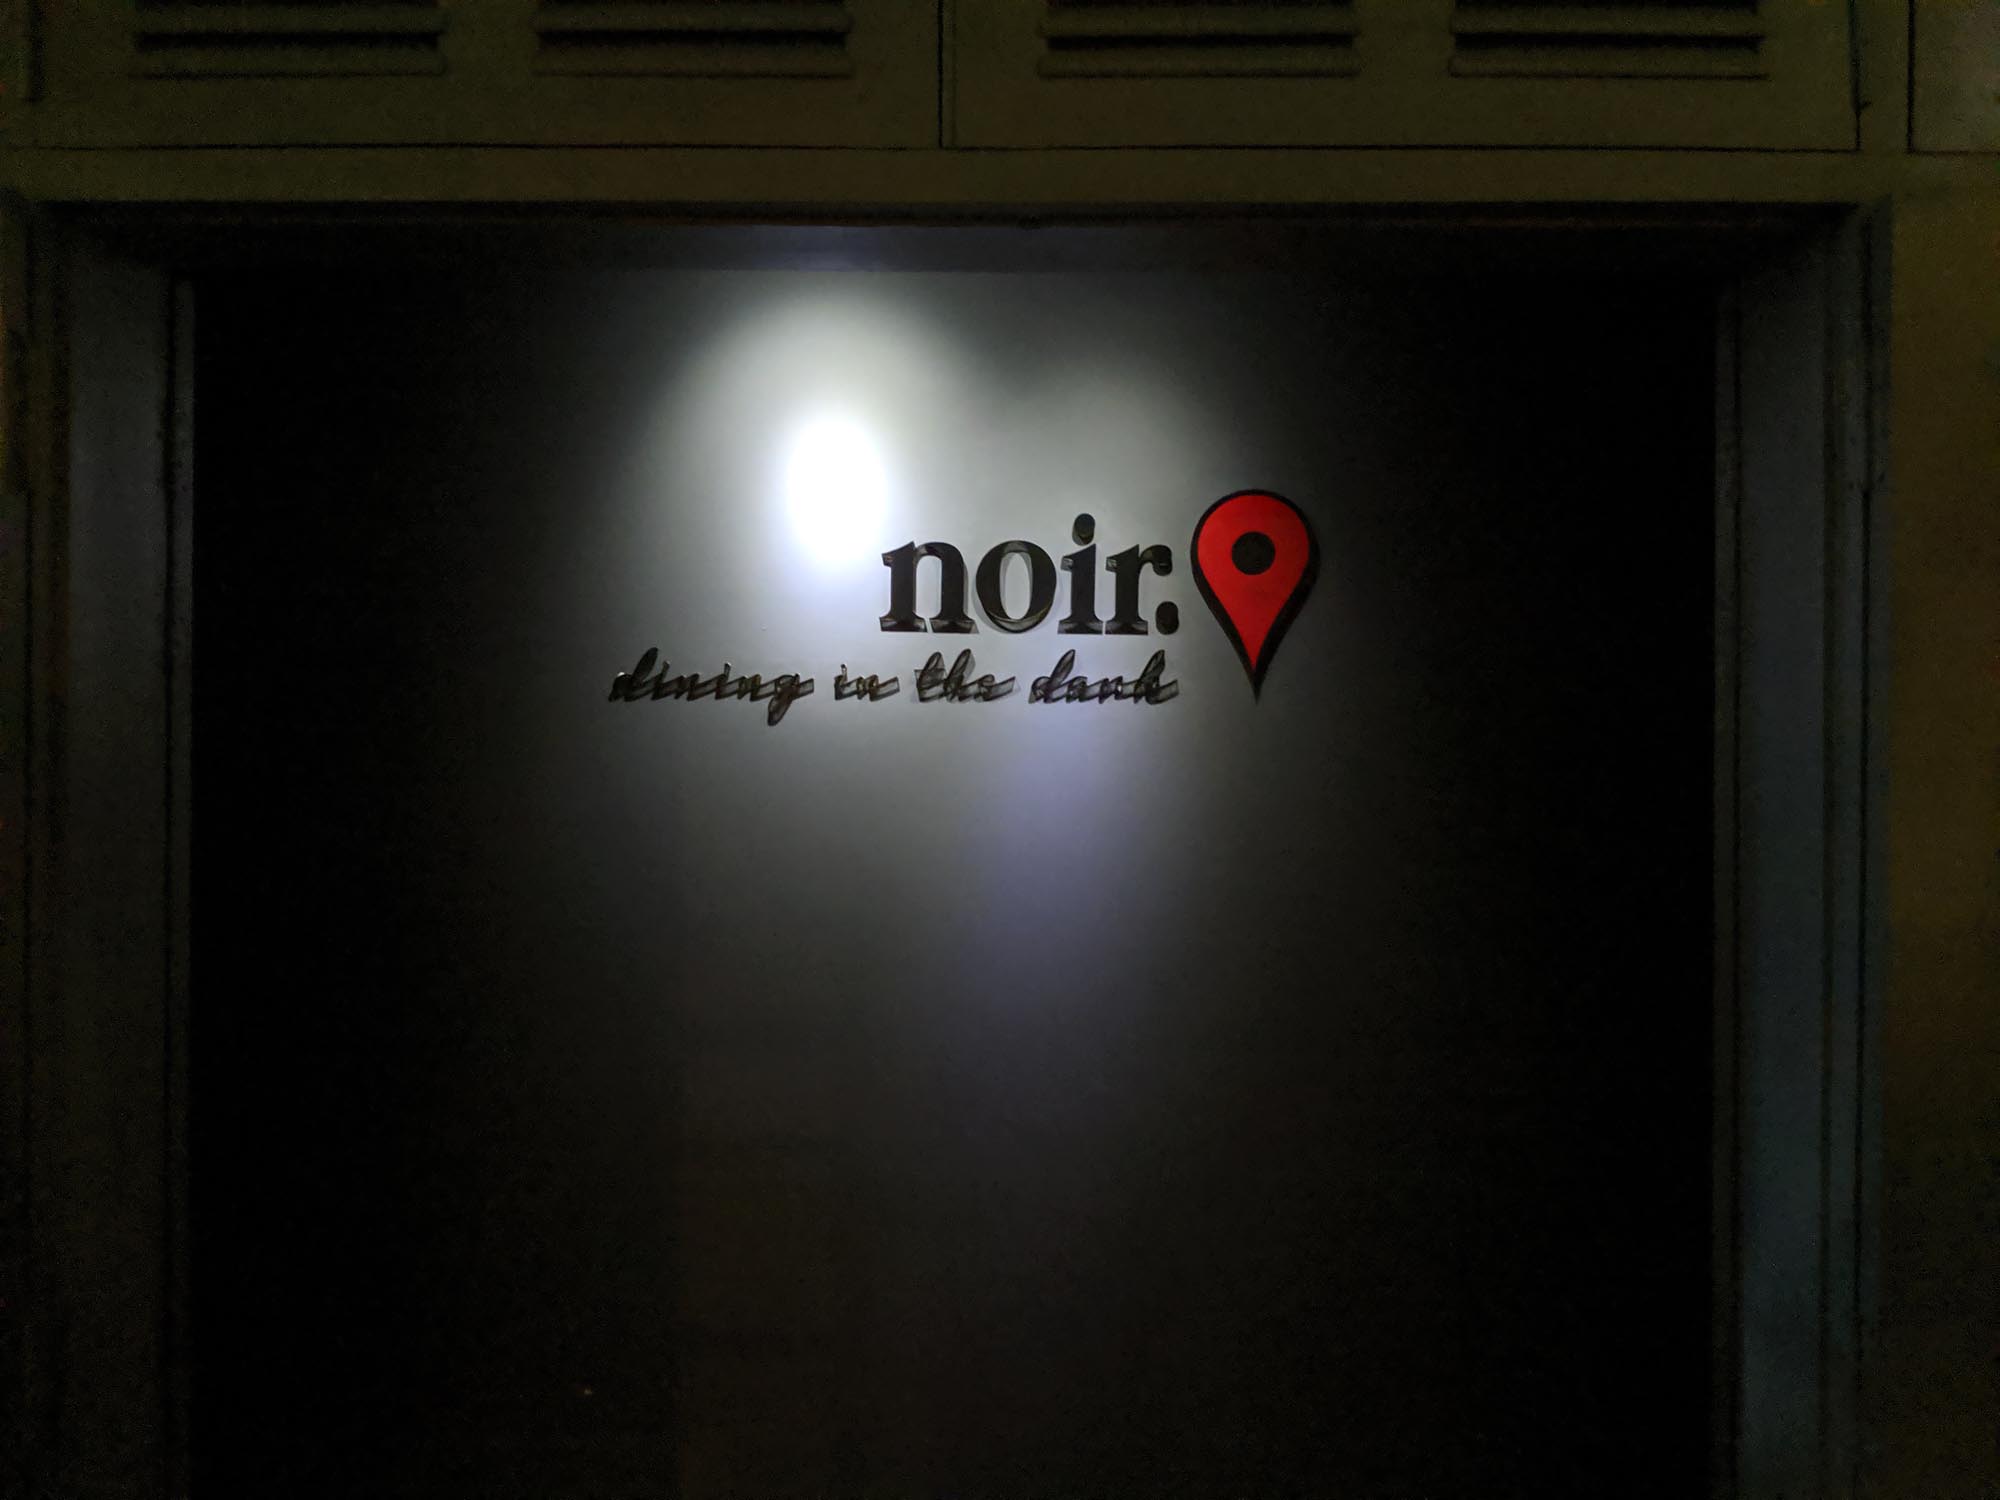 Dine in the dark at Noir. Dining in the Dark restaurant to experience the world of someone with disabilities. Photo by Nam Quoc Tran